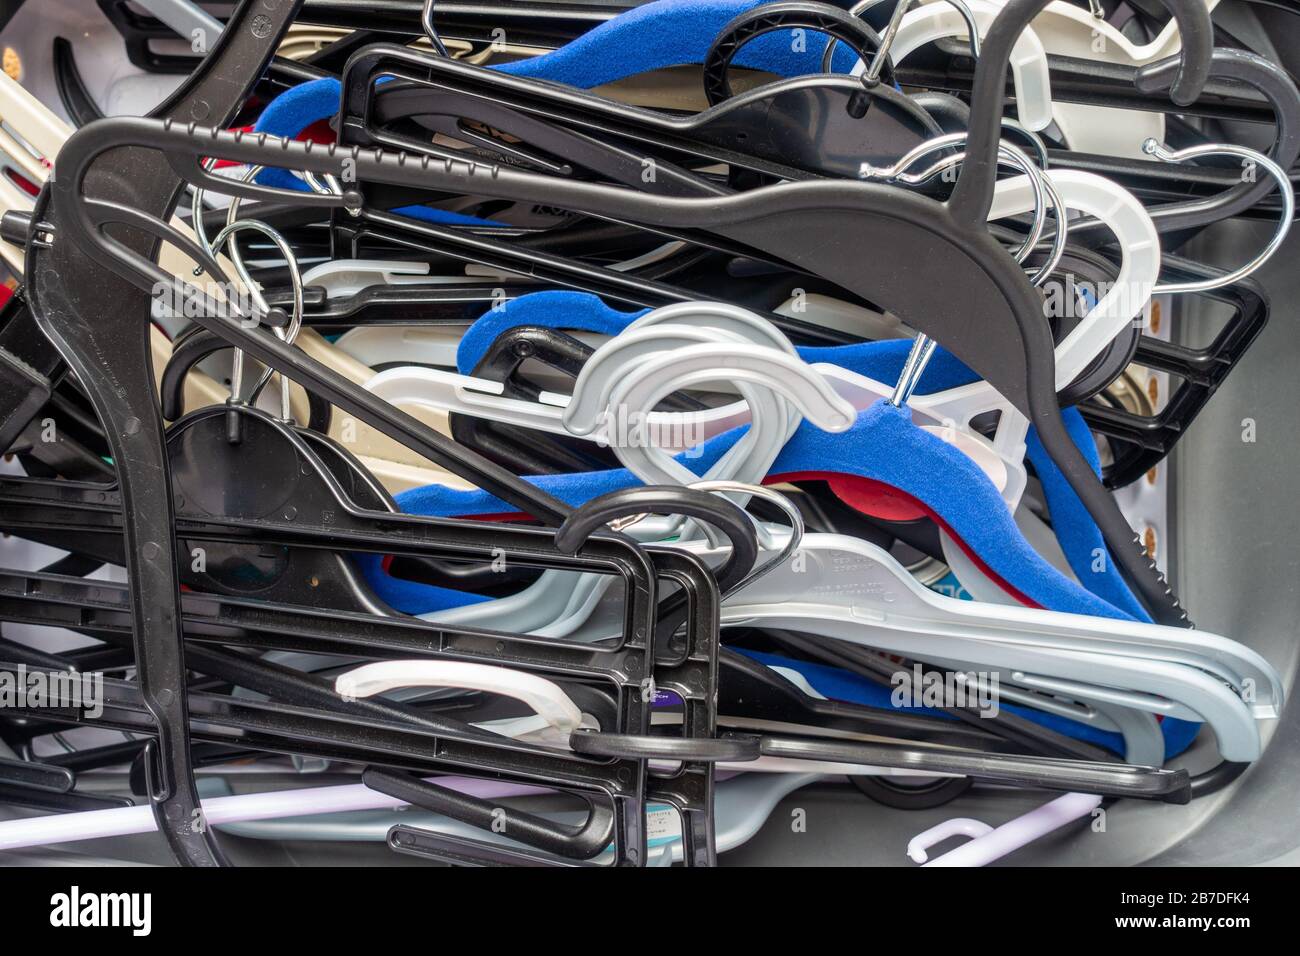 A messy, untidy pile of plastic coat hangers Stock Photo